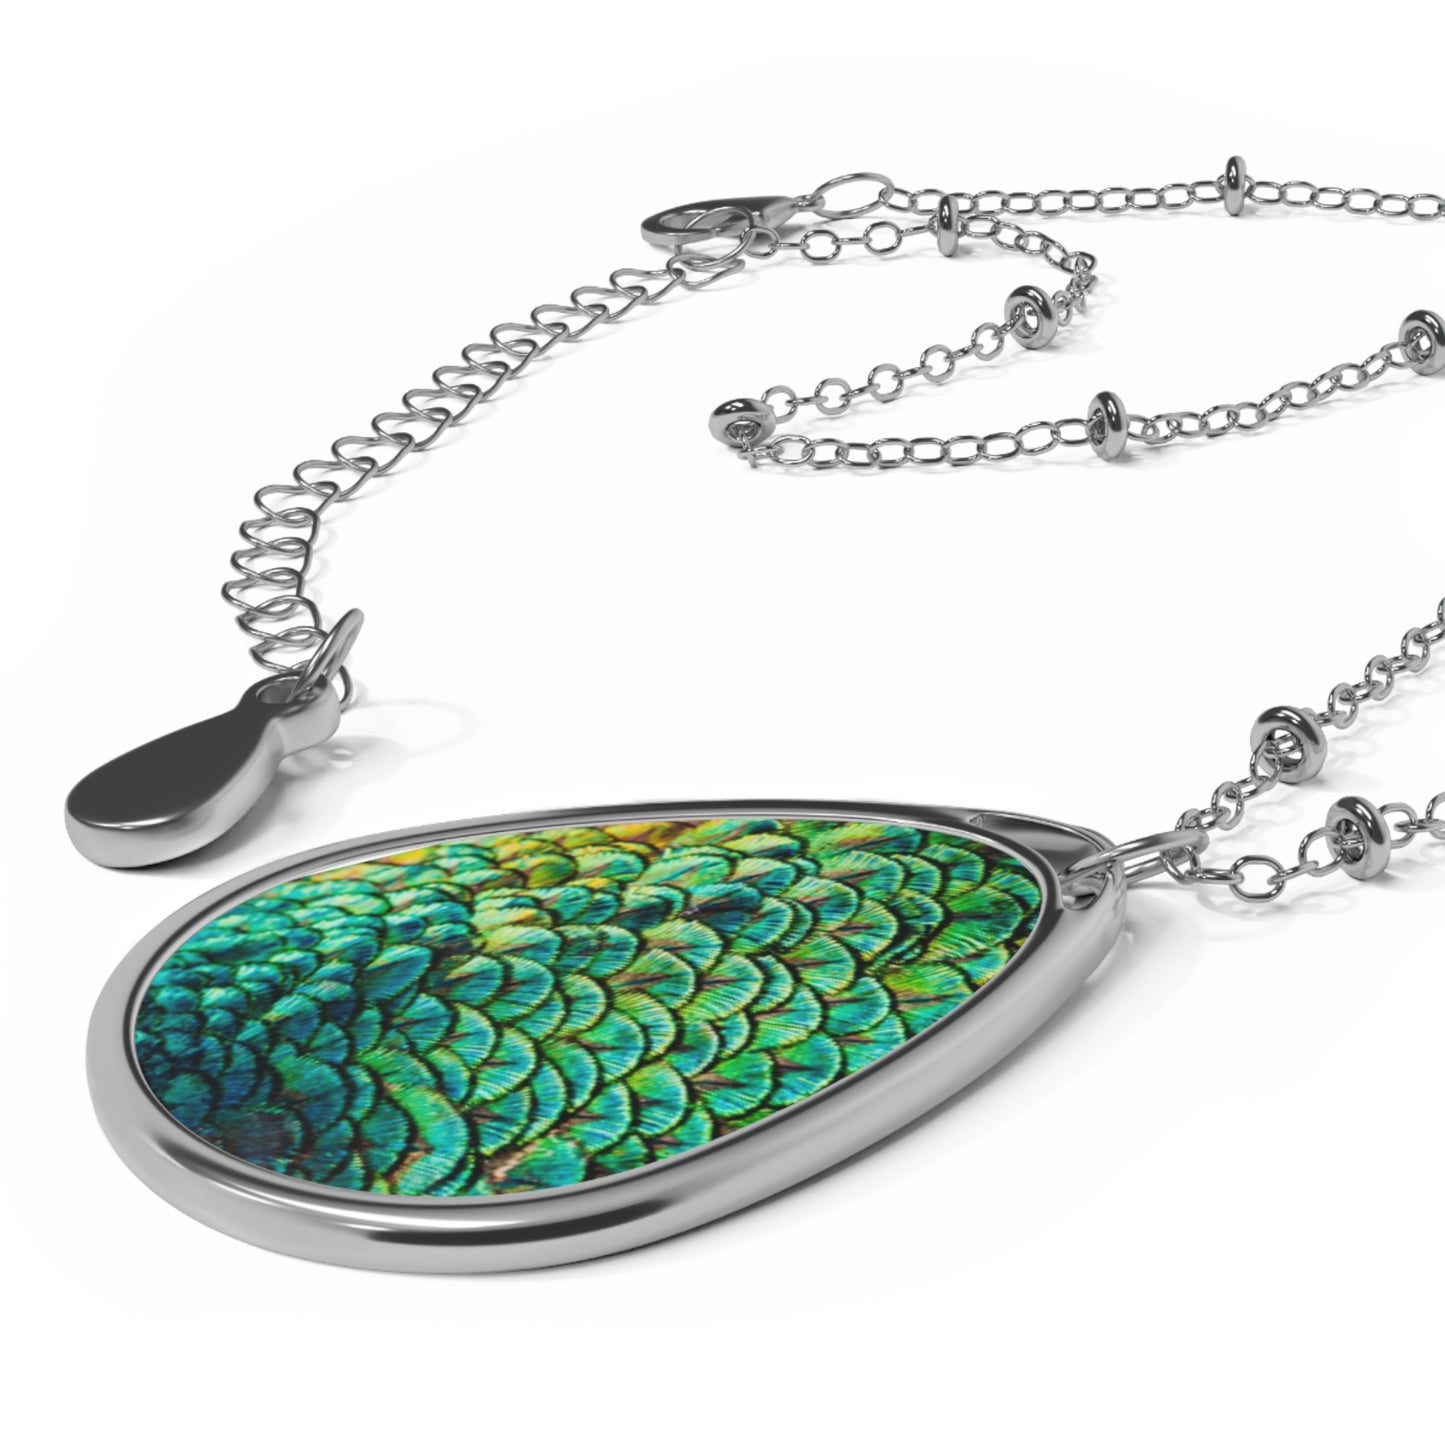 Beholding Eyes | Cowgirl Peacock Print Pendant Necklace